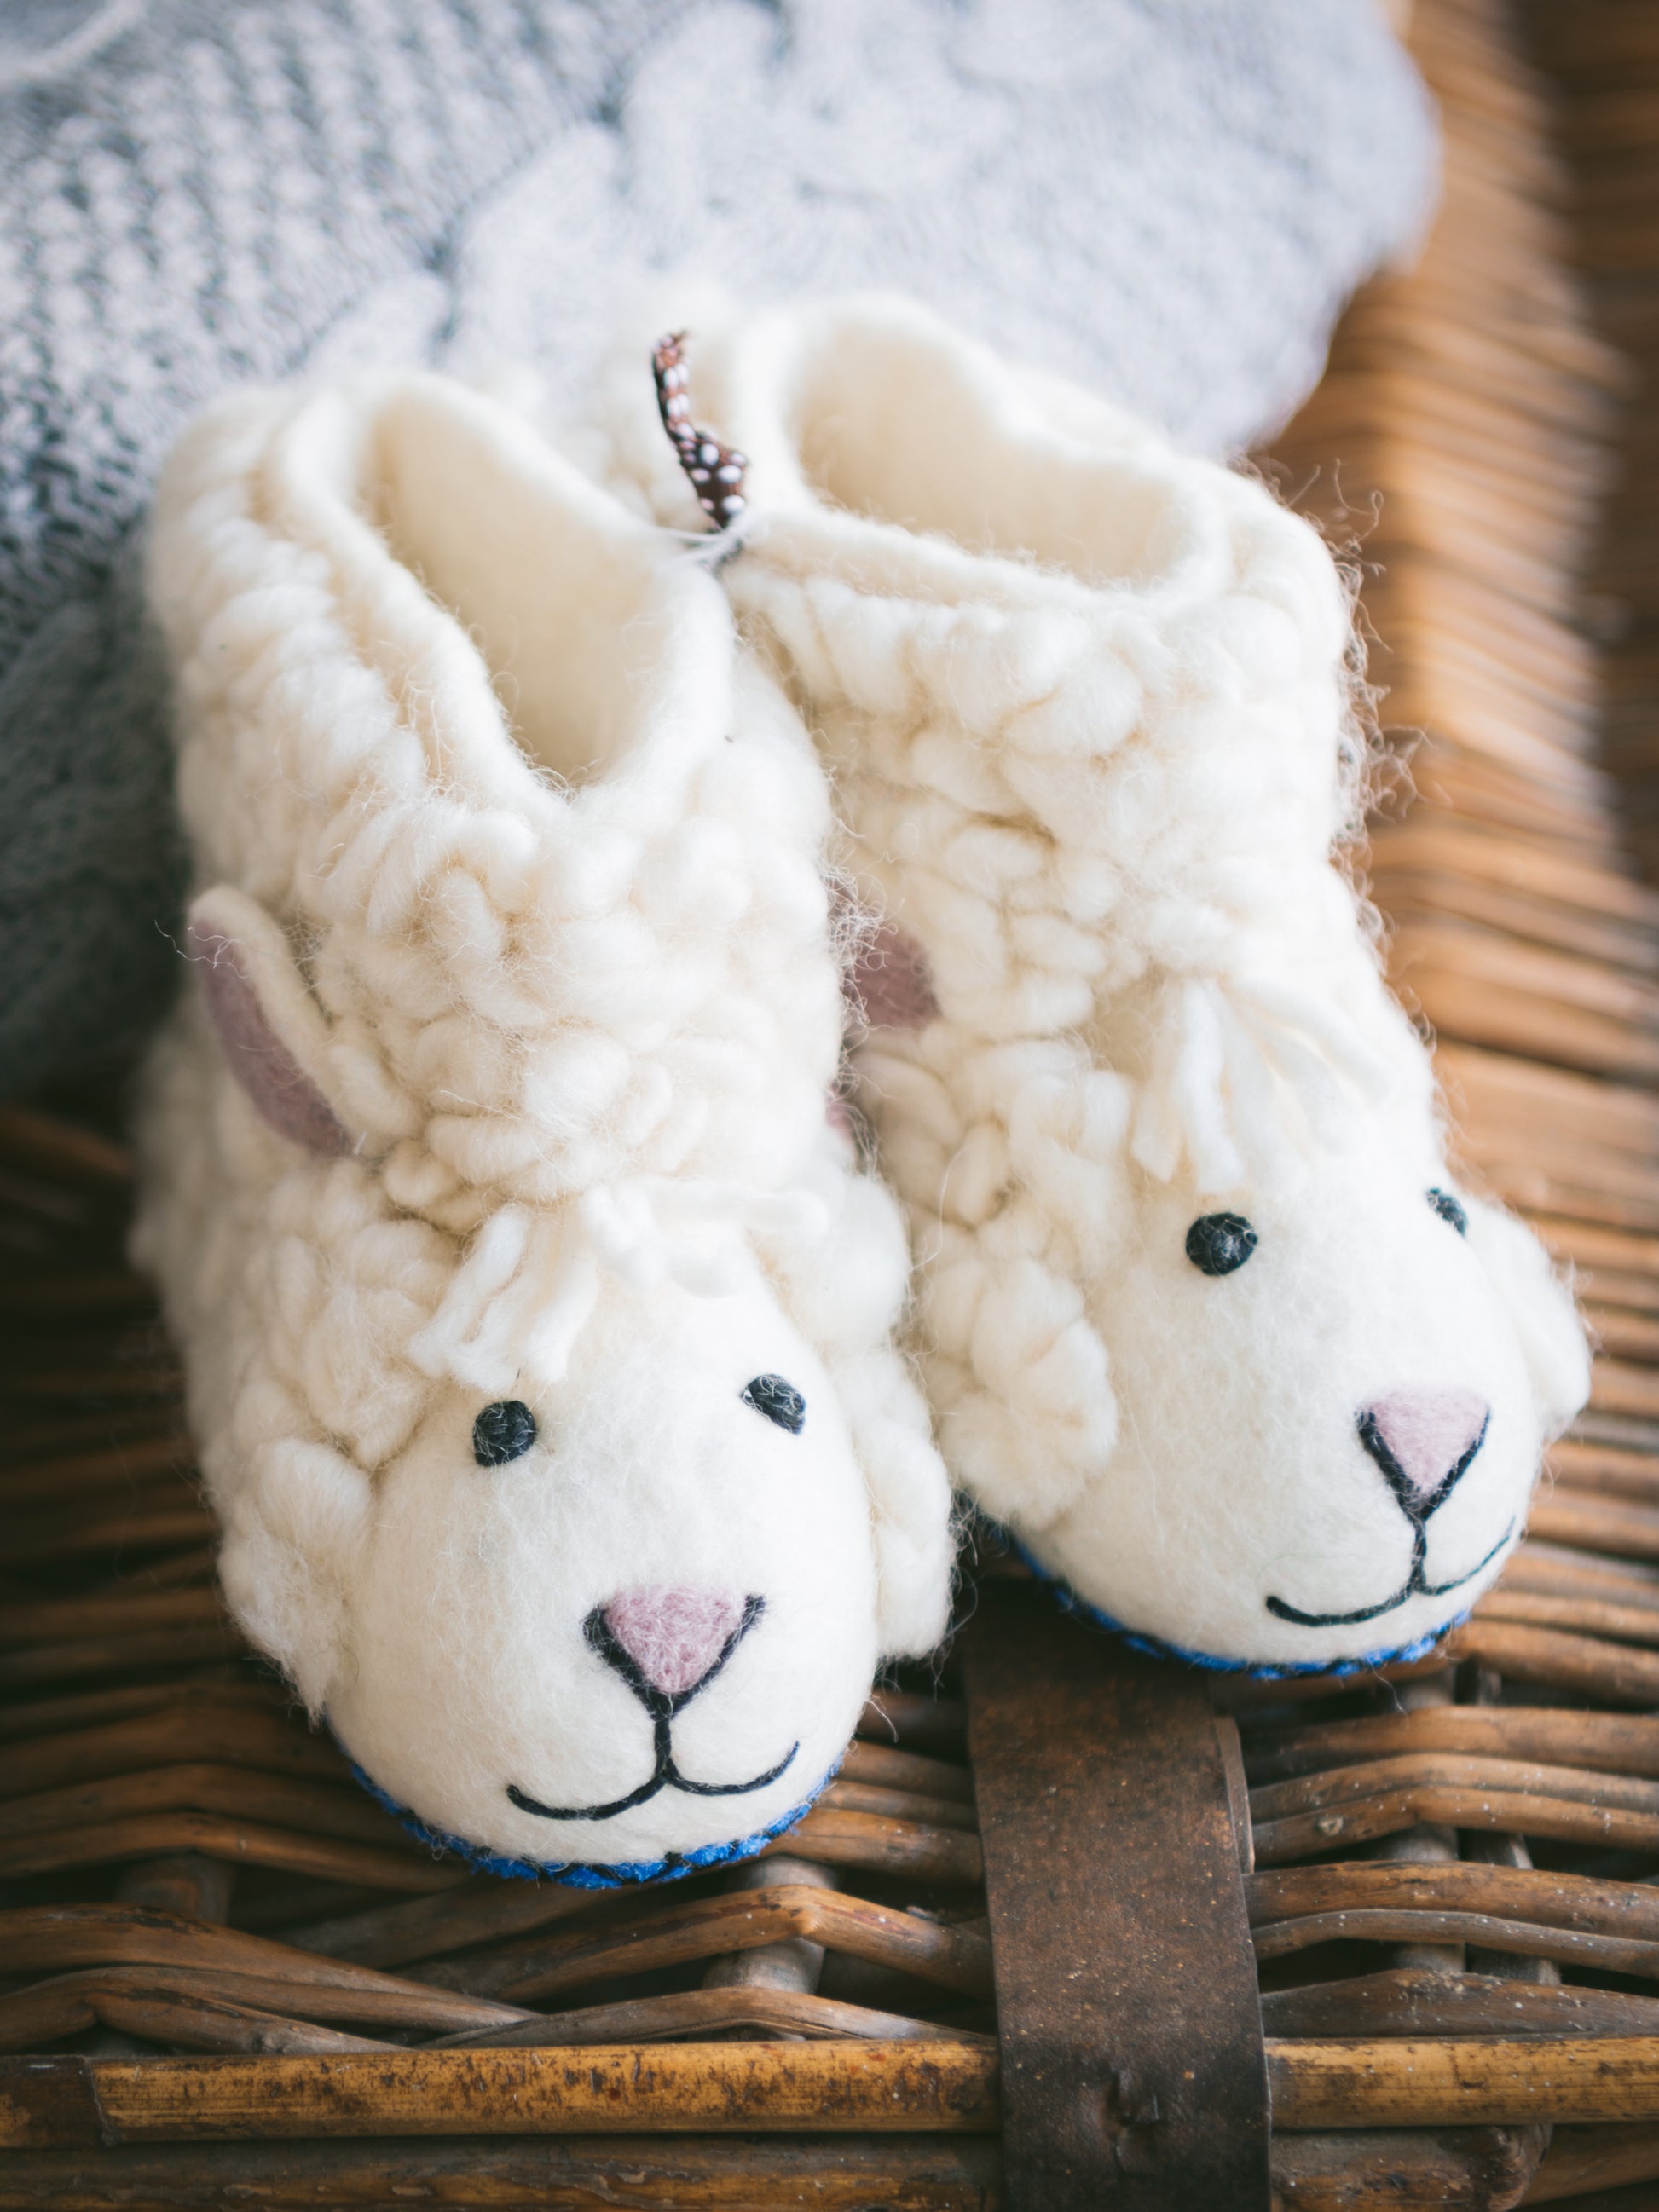 Skuffelse hit Personlig Shop the Sew Heart Felt Sheep Slippers at Weston Table